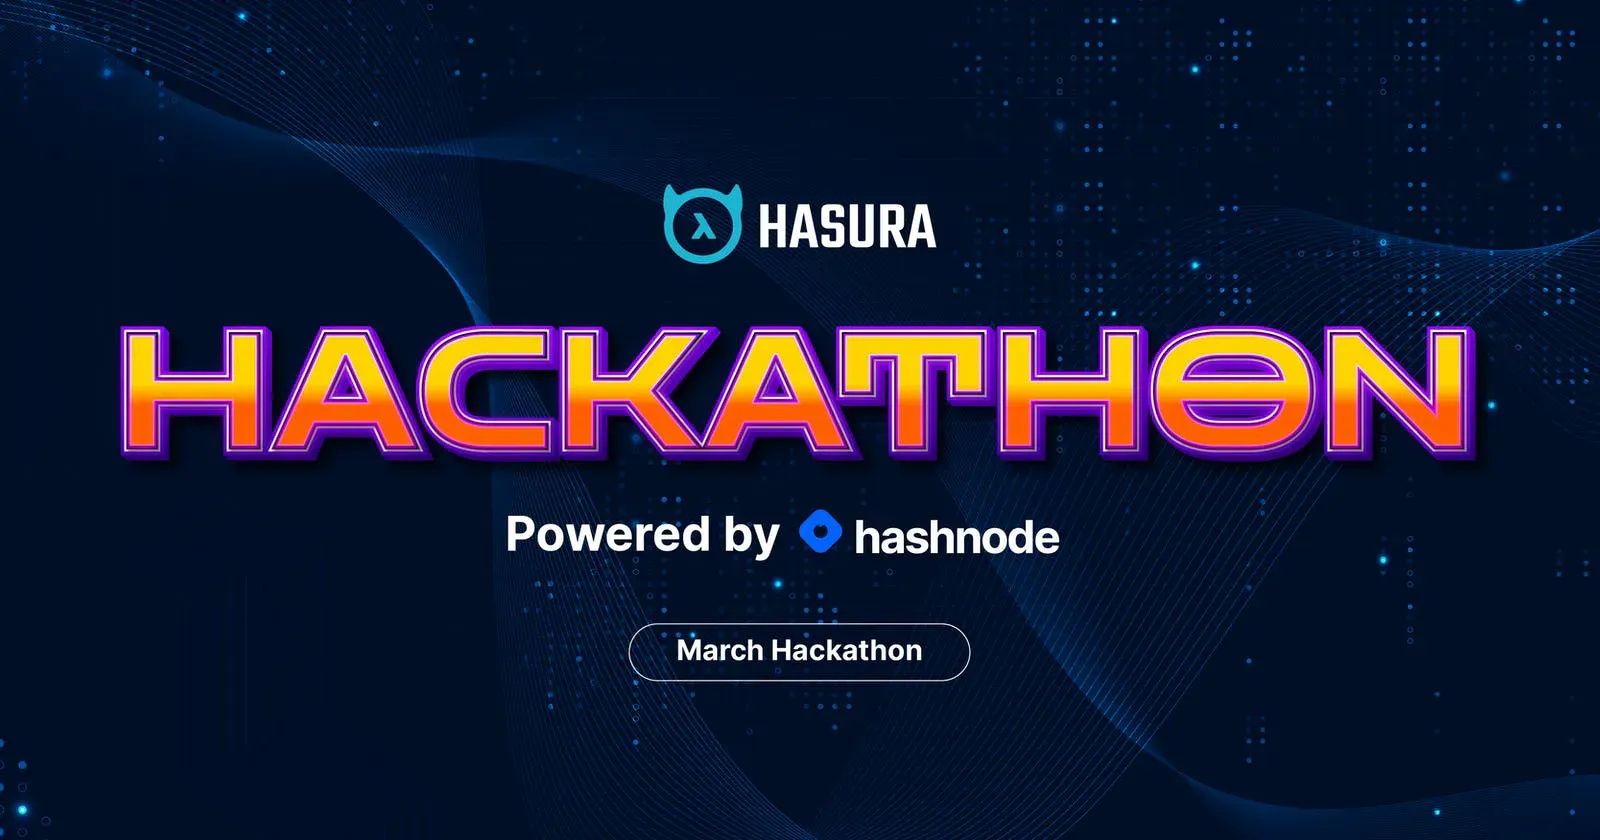 Learn GraphQL and Build Apps with Hasura in #HasuraHackathon